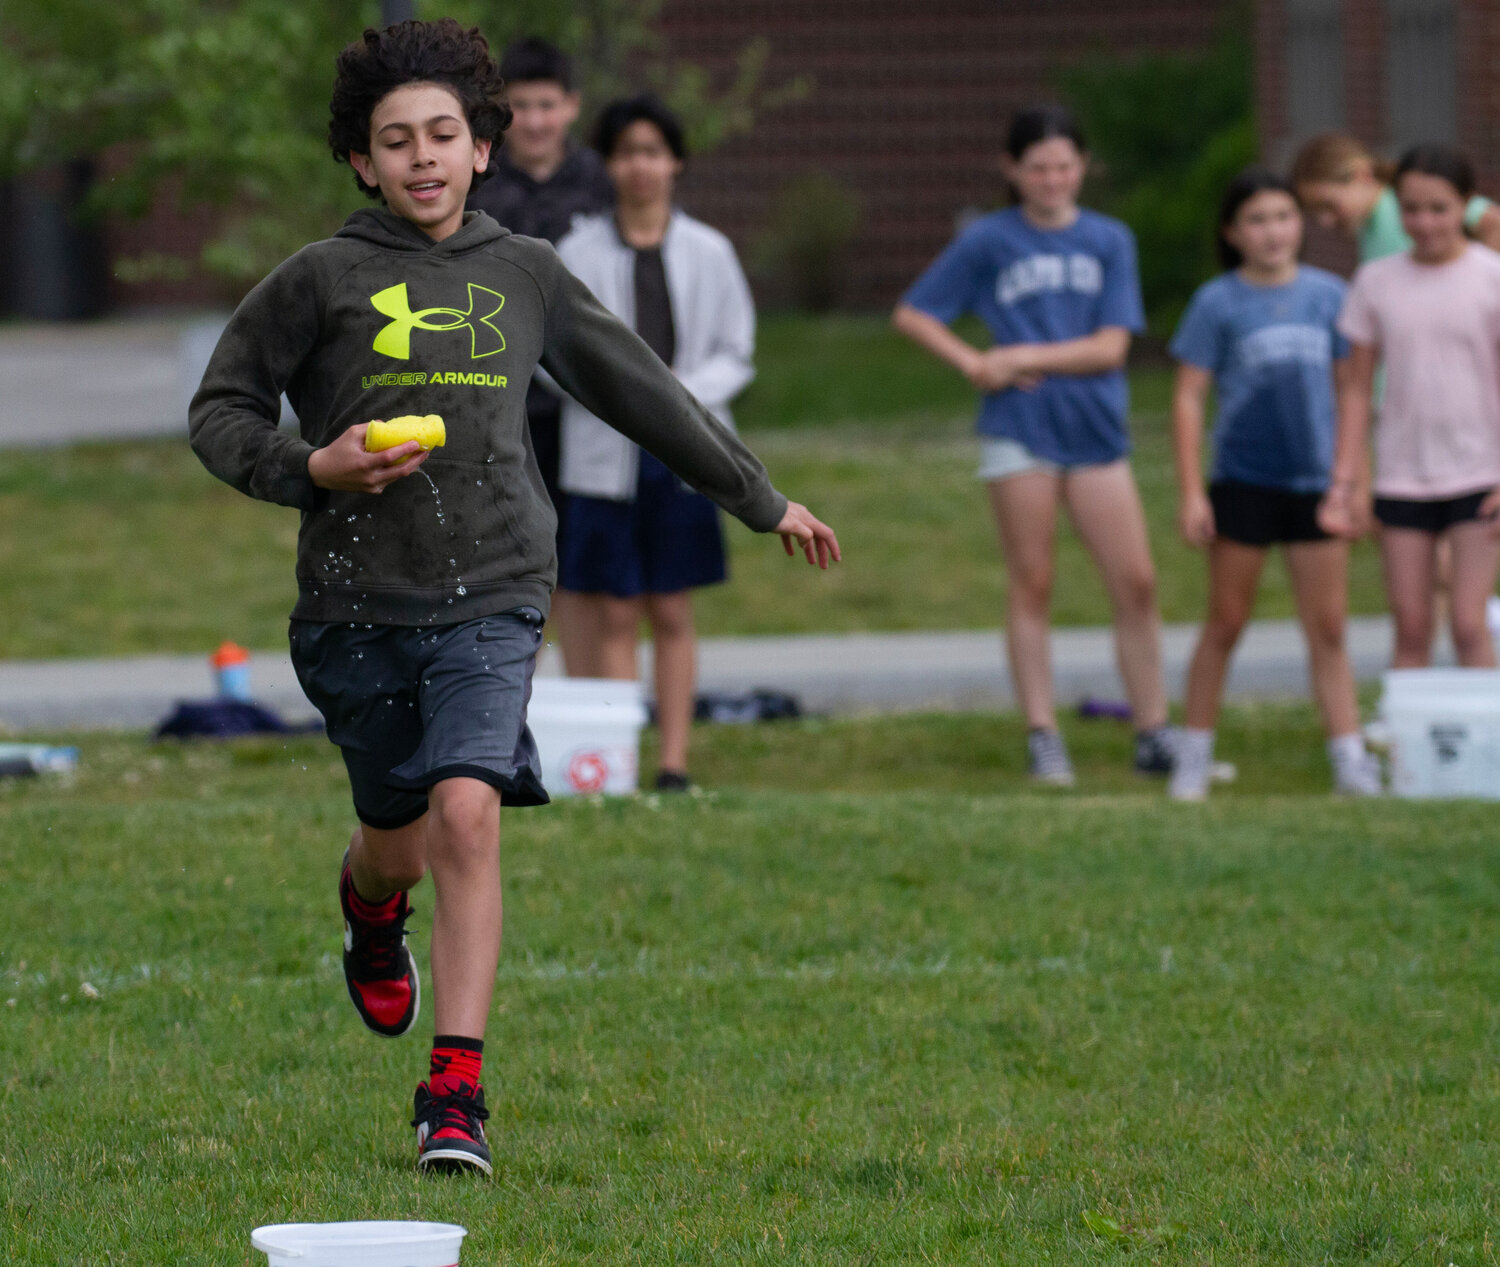 Angelo Perry competes in the sponge race during Lime Cluster's Field Day last week.